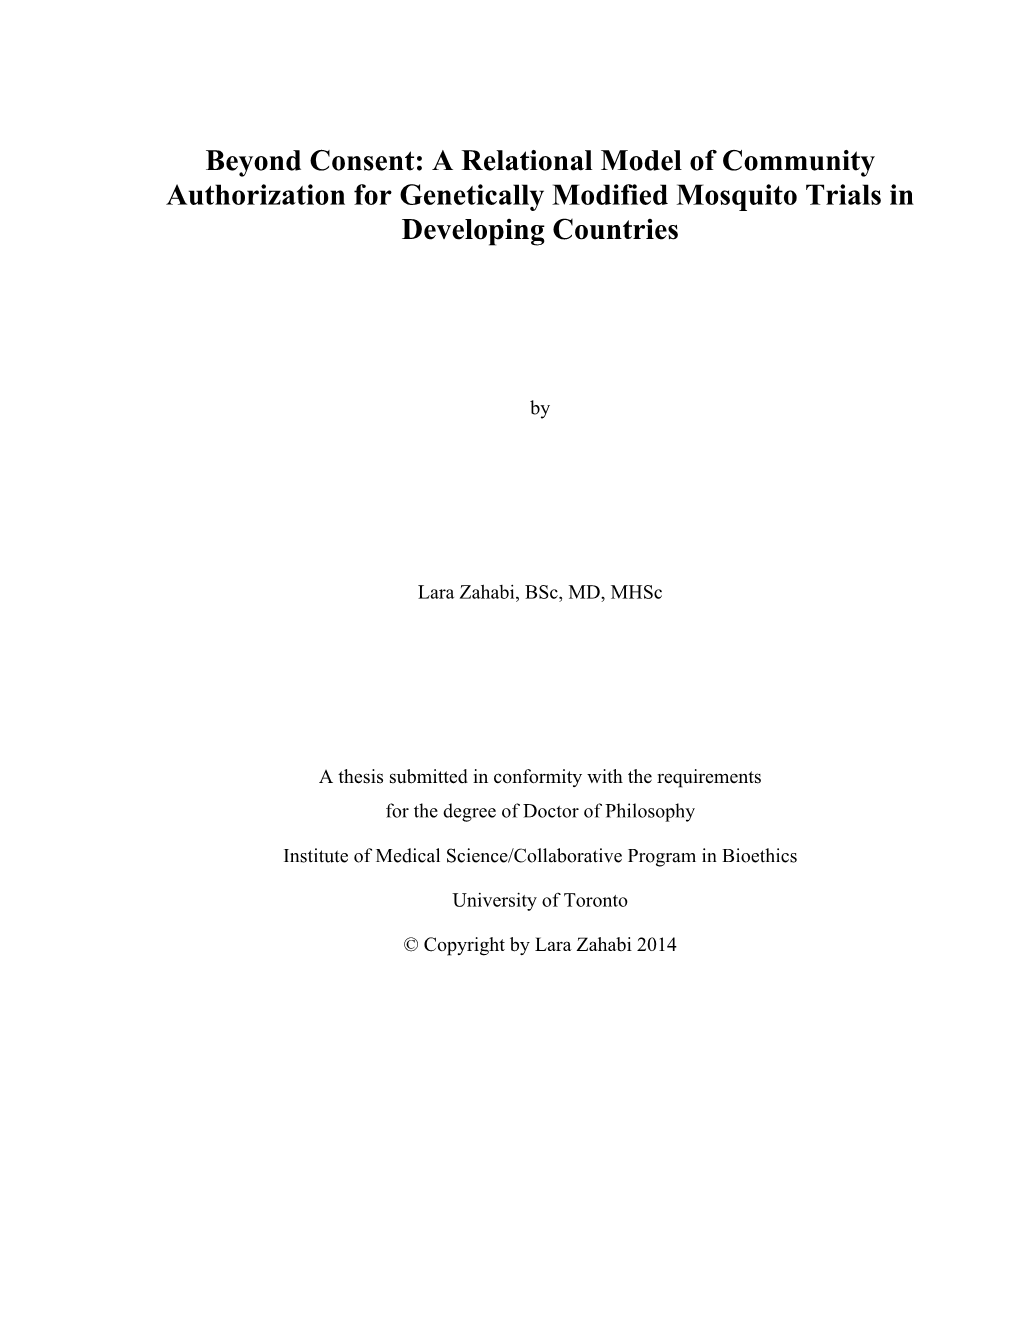 Beyond Consent: a Relational Model of Community Authorization for Genetically Modified Mosquito Trials in Developing Countries